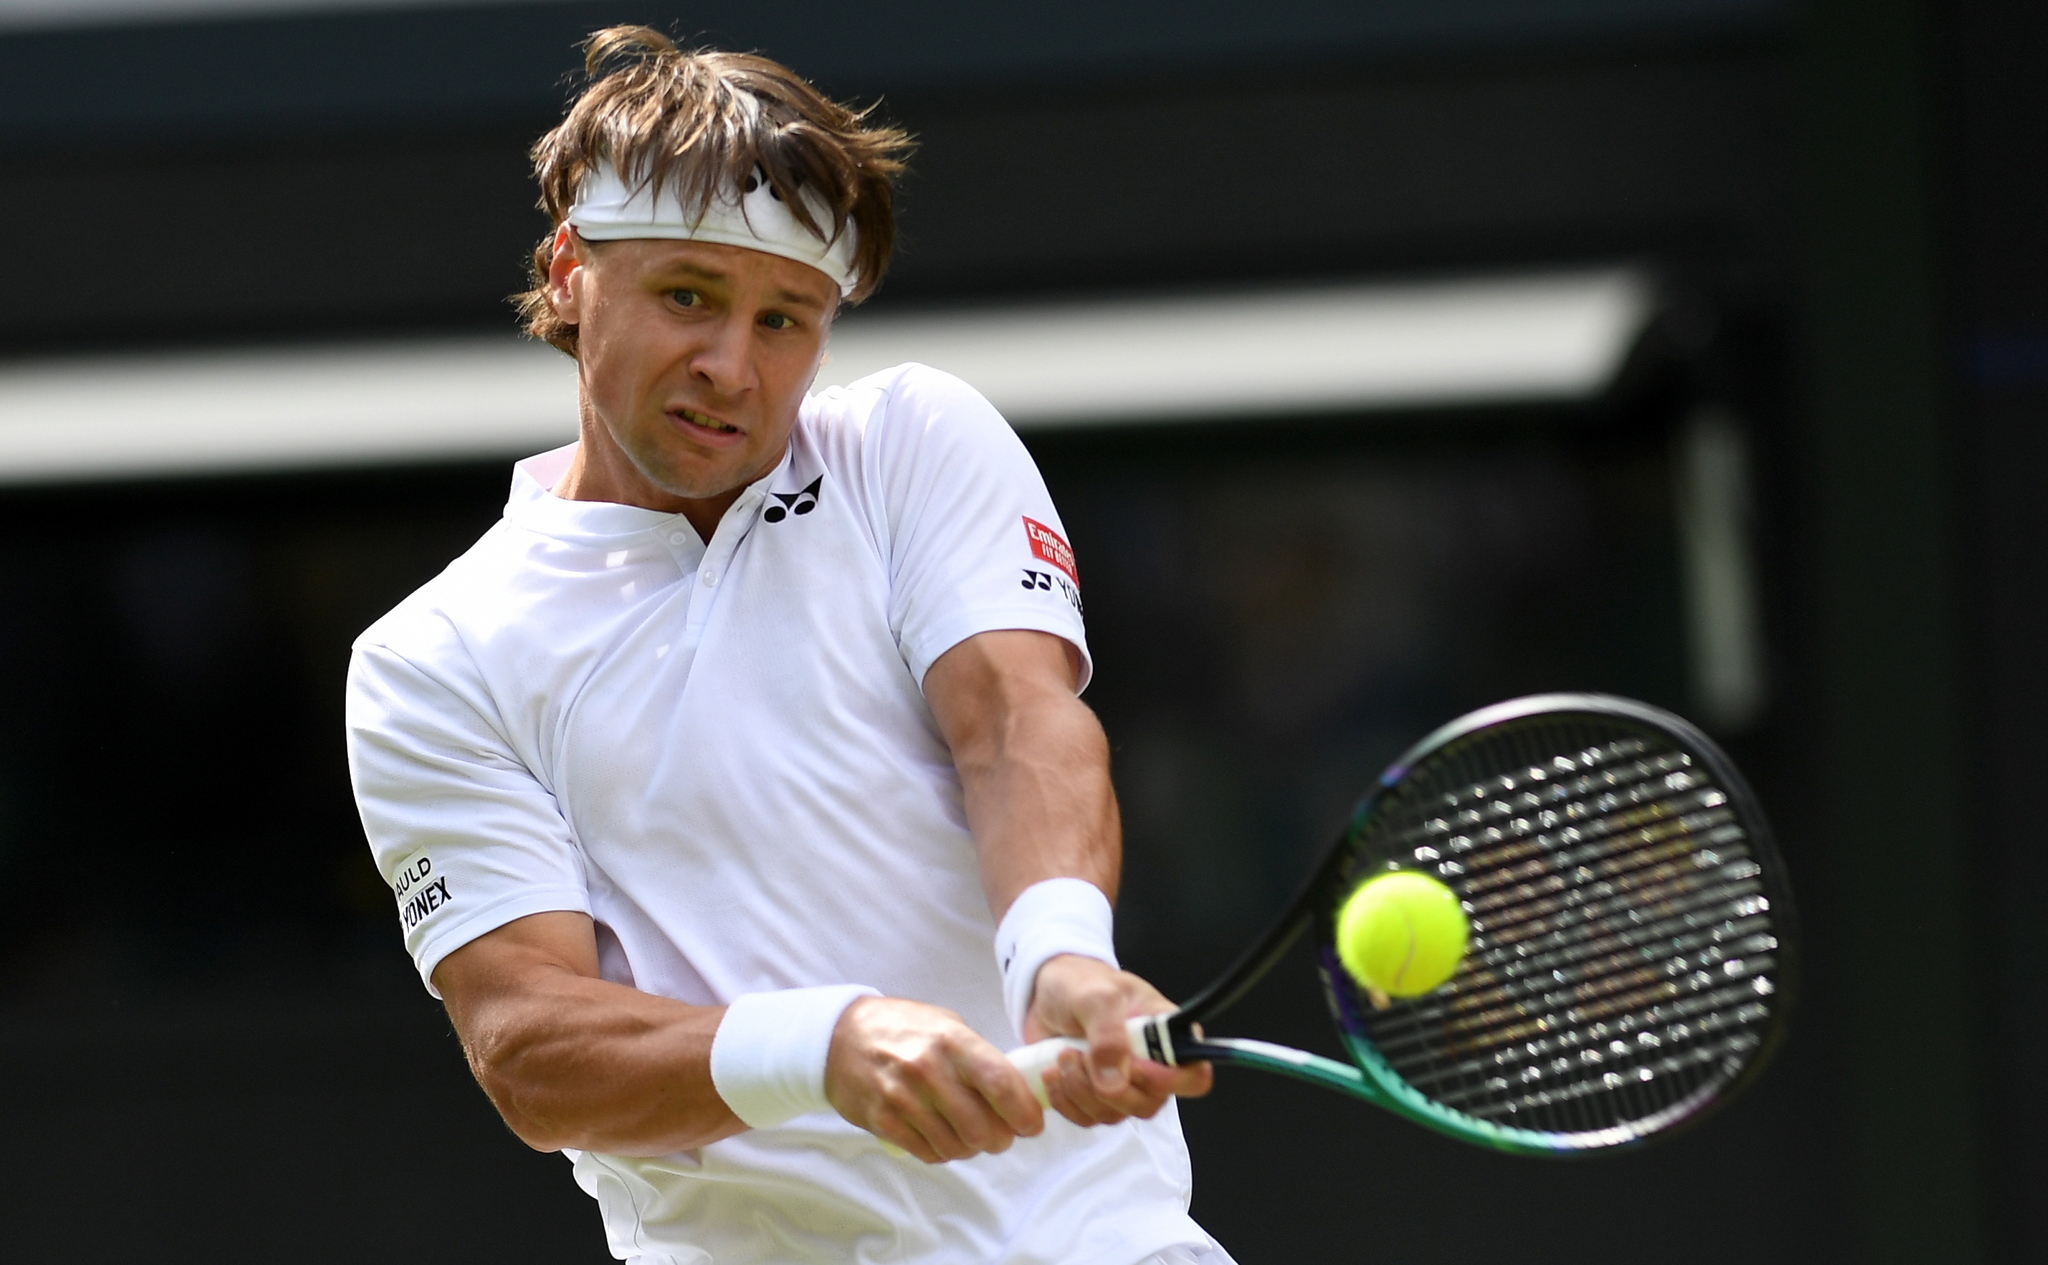 Wimbledon (United Kingdom), 30/06/2022.- Ricardas Berankis of Lithuania in action in the men's second round match against Rafael  lt;HIT gt;Nadal lt;/HIT gt; of Spain at the Wimbledon Championships, in Wimbledon, Britain, 30 June 2022. (Tenis, Lituania, España, Reino Unido) EFE/EPA/NEIL HALL EDITORIAL USE ONLY